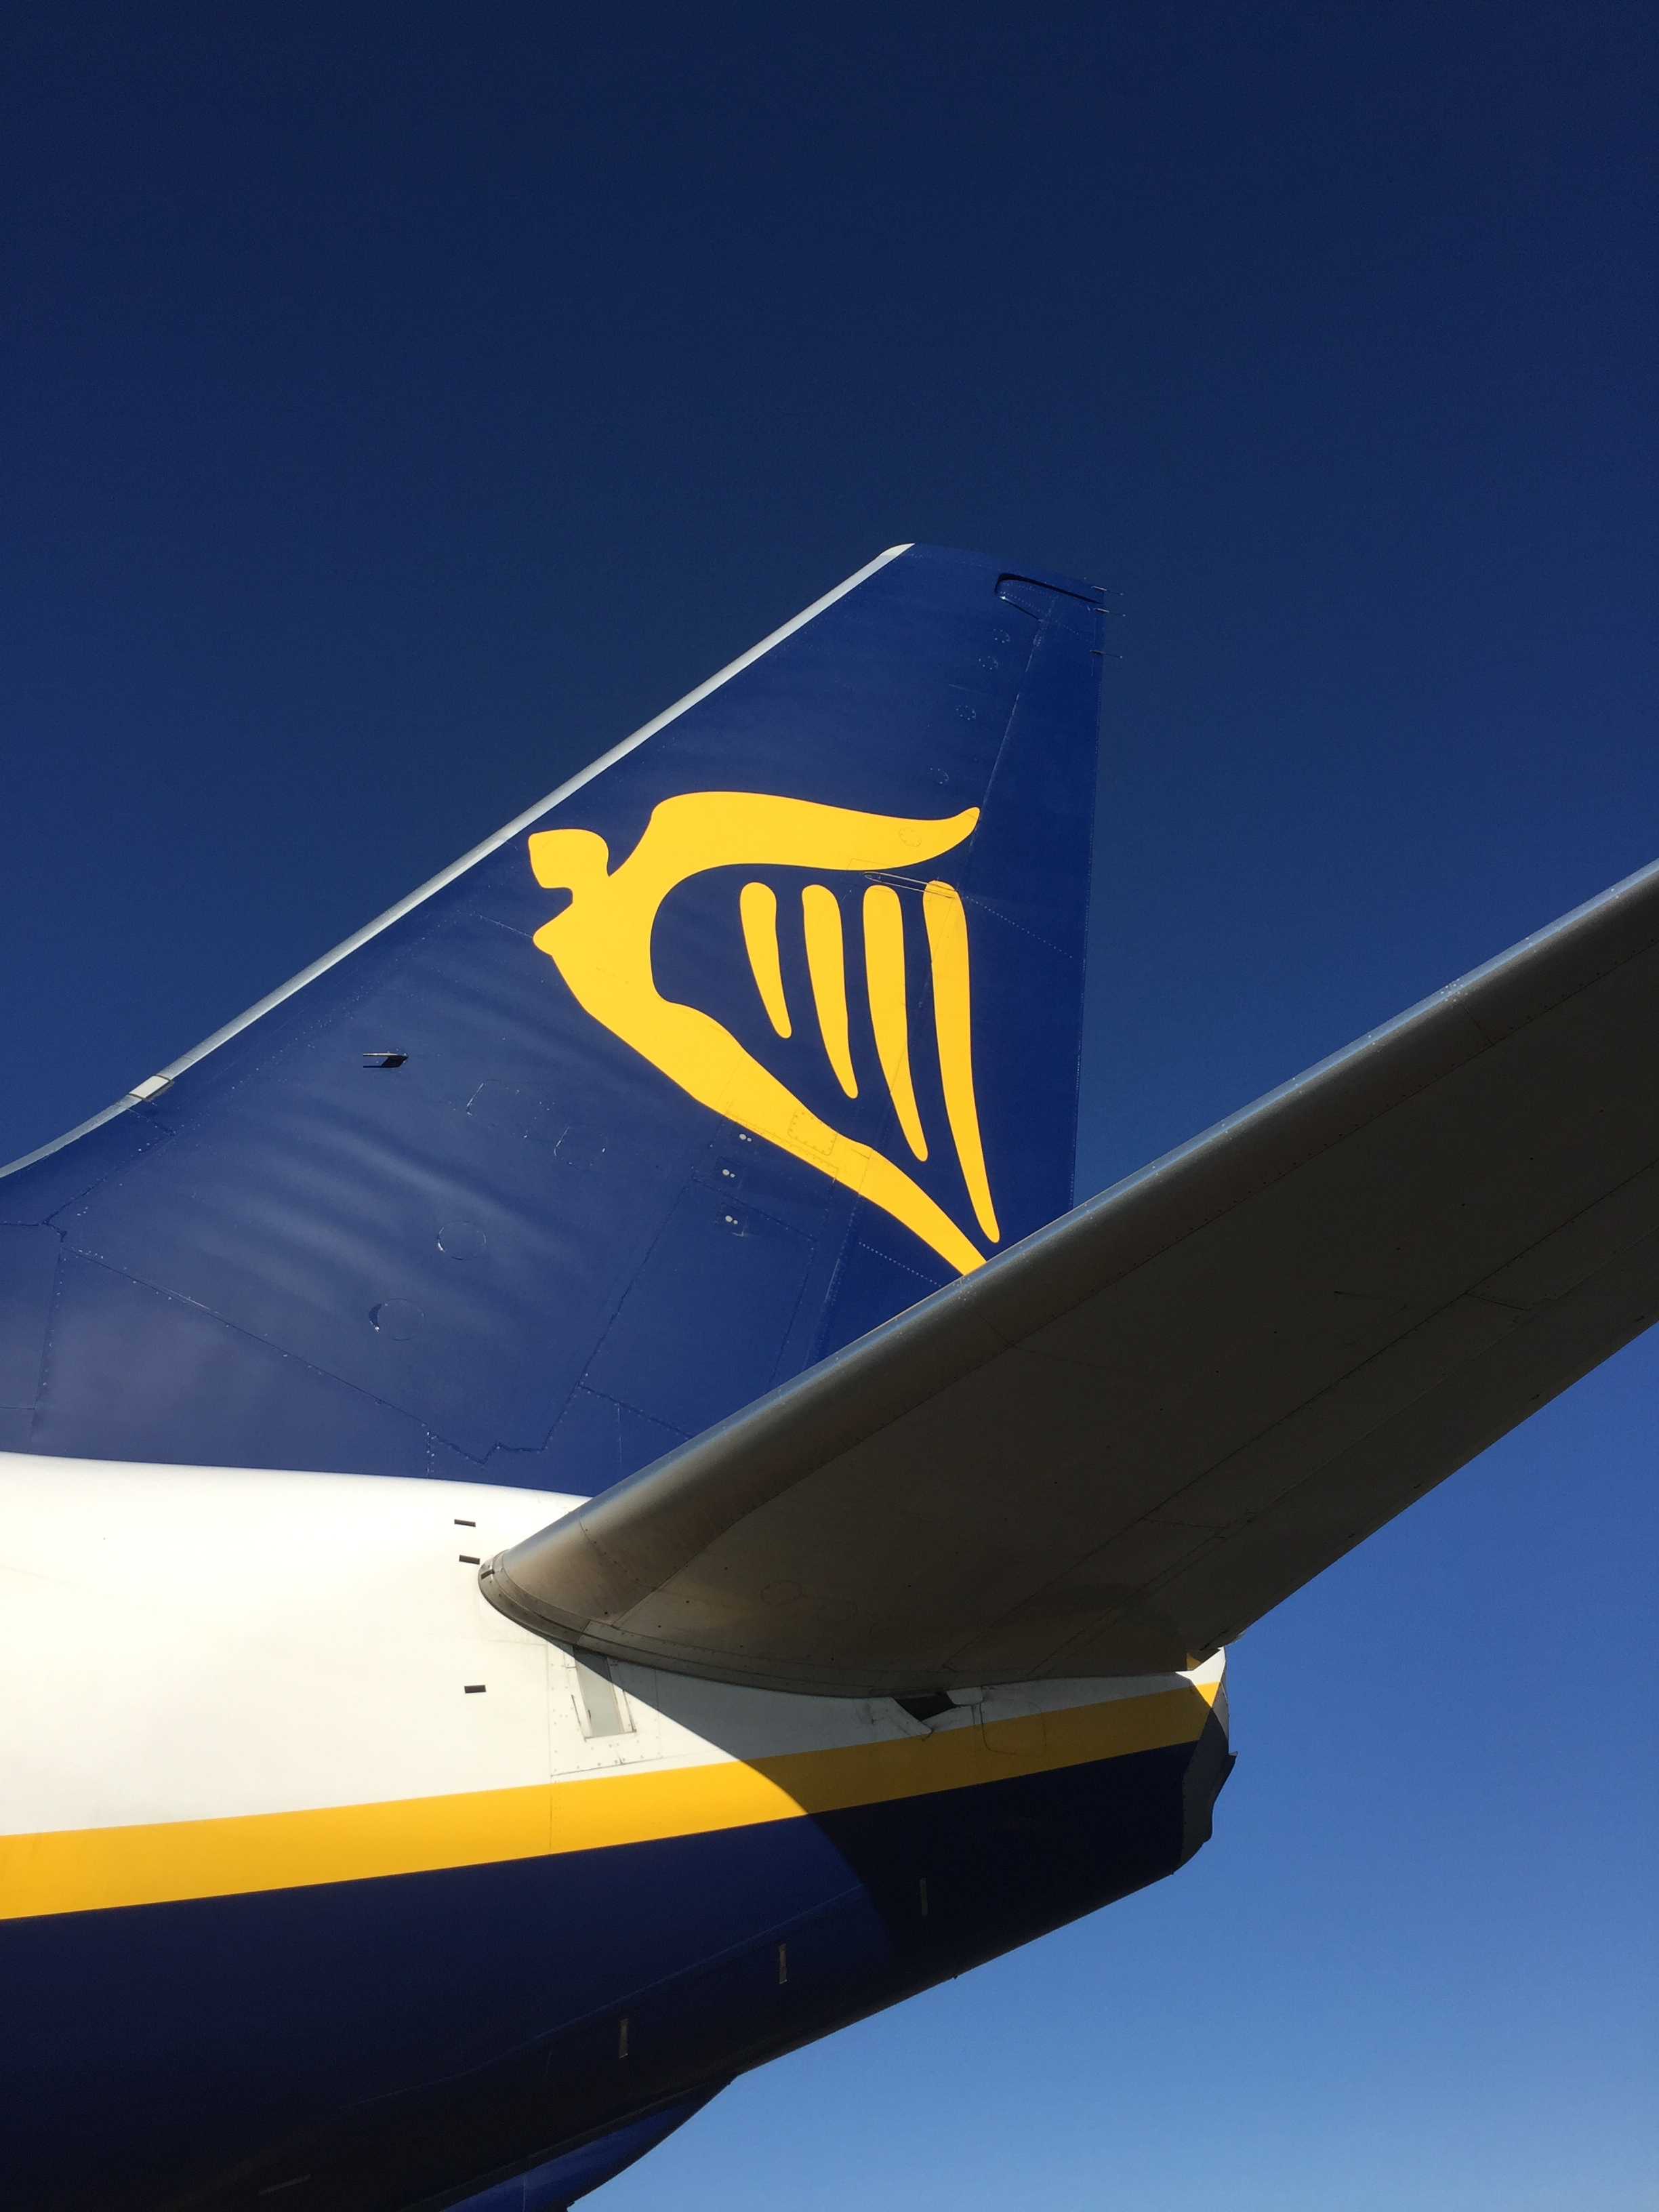 How to Book a Flight on Ryanair and Avoid Hidden Fees